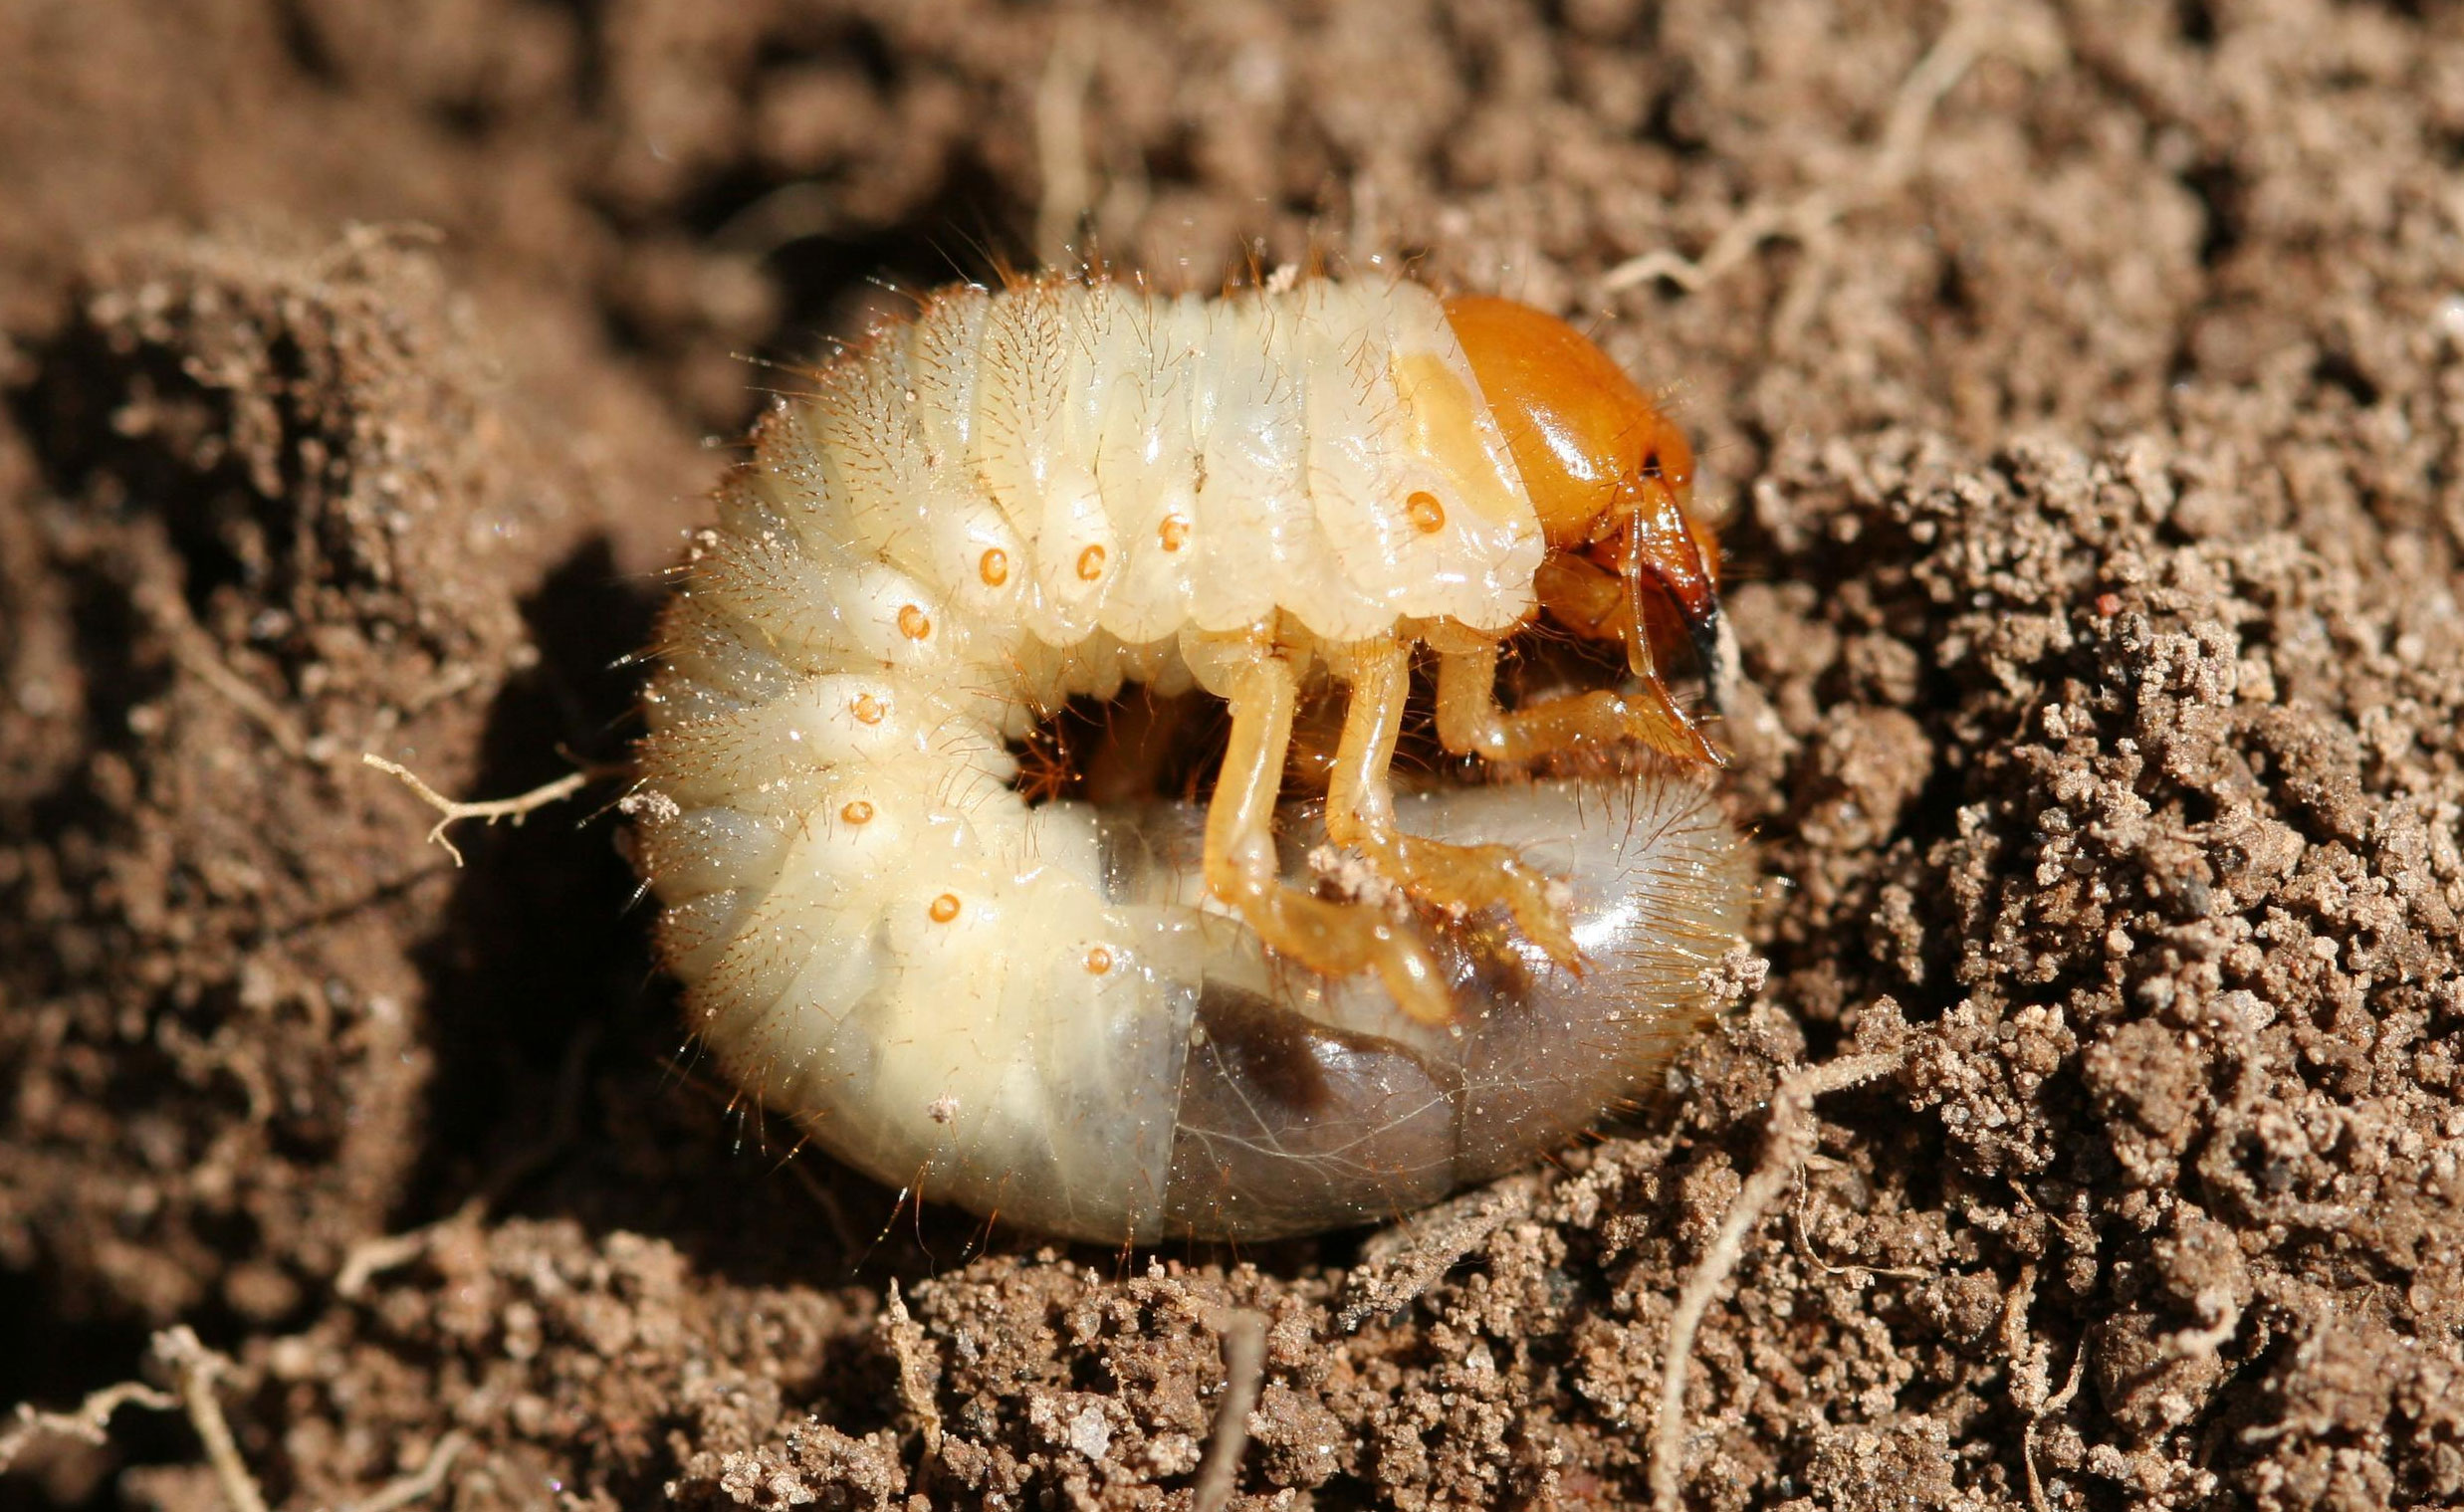 A grub that has an orange colored head and legs and a white body with a dark grey tip at the end. The grub is laying on top of the soil.